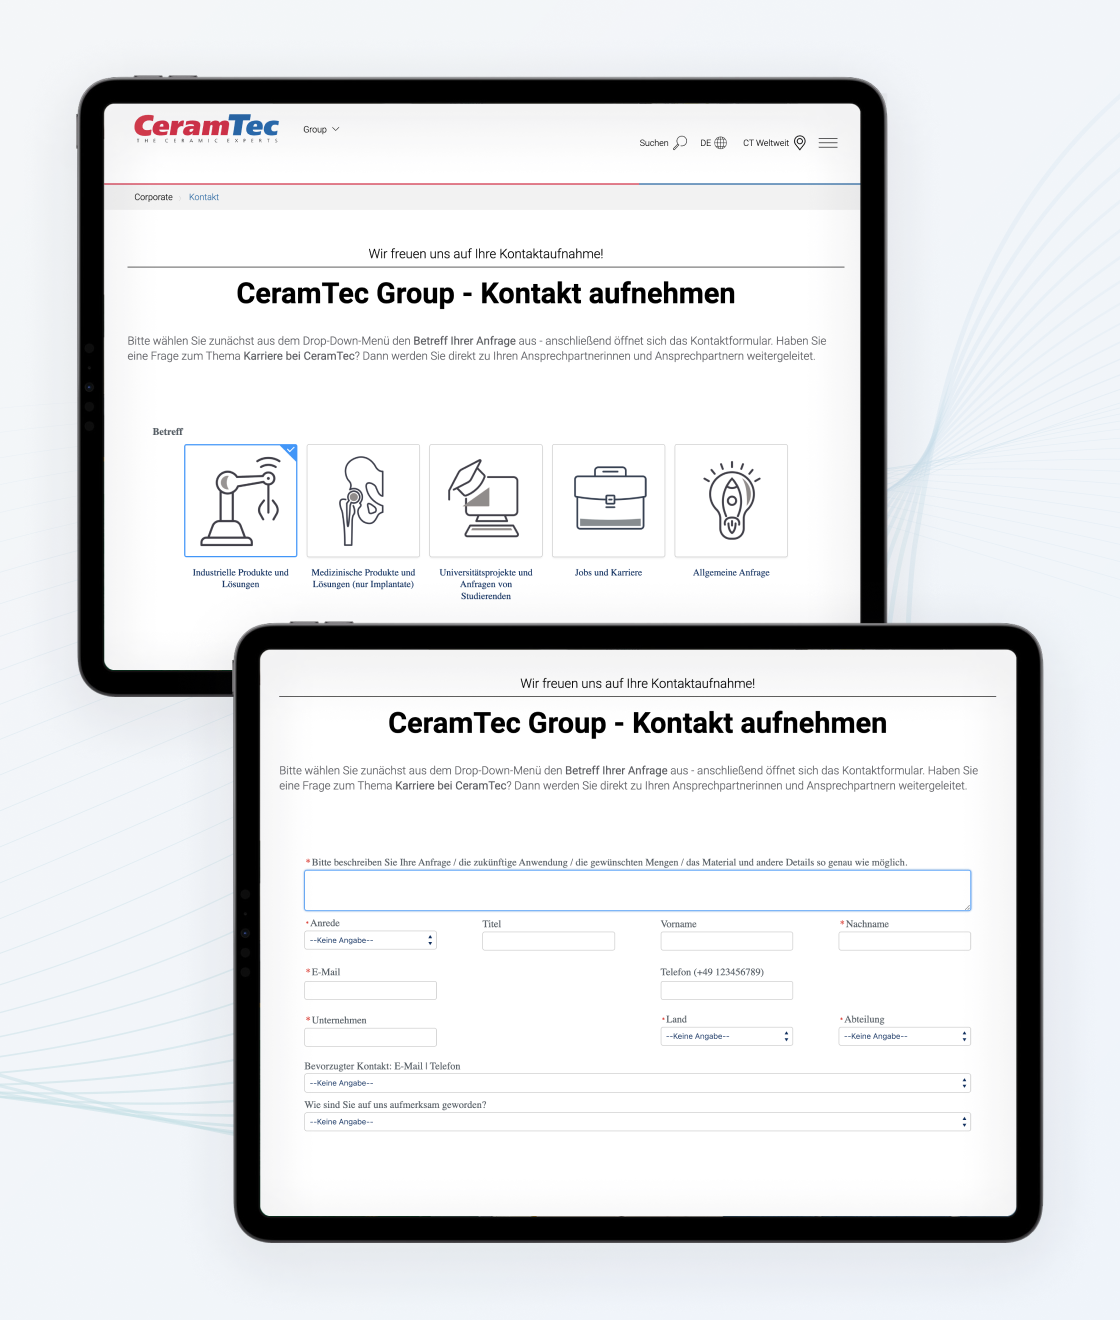 Screenshots of two stages of the contact form